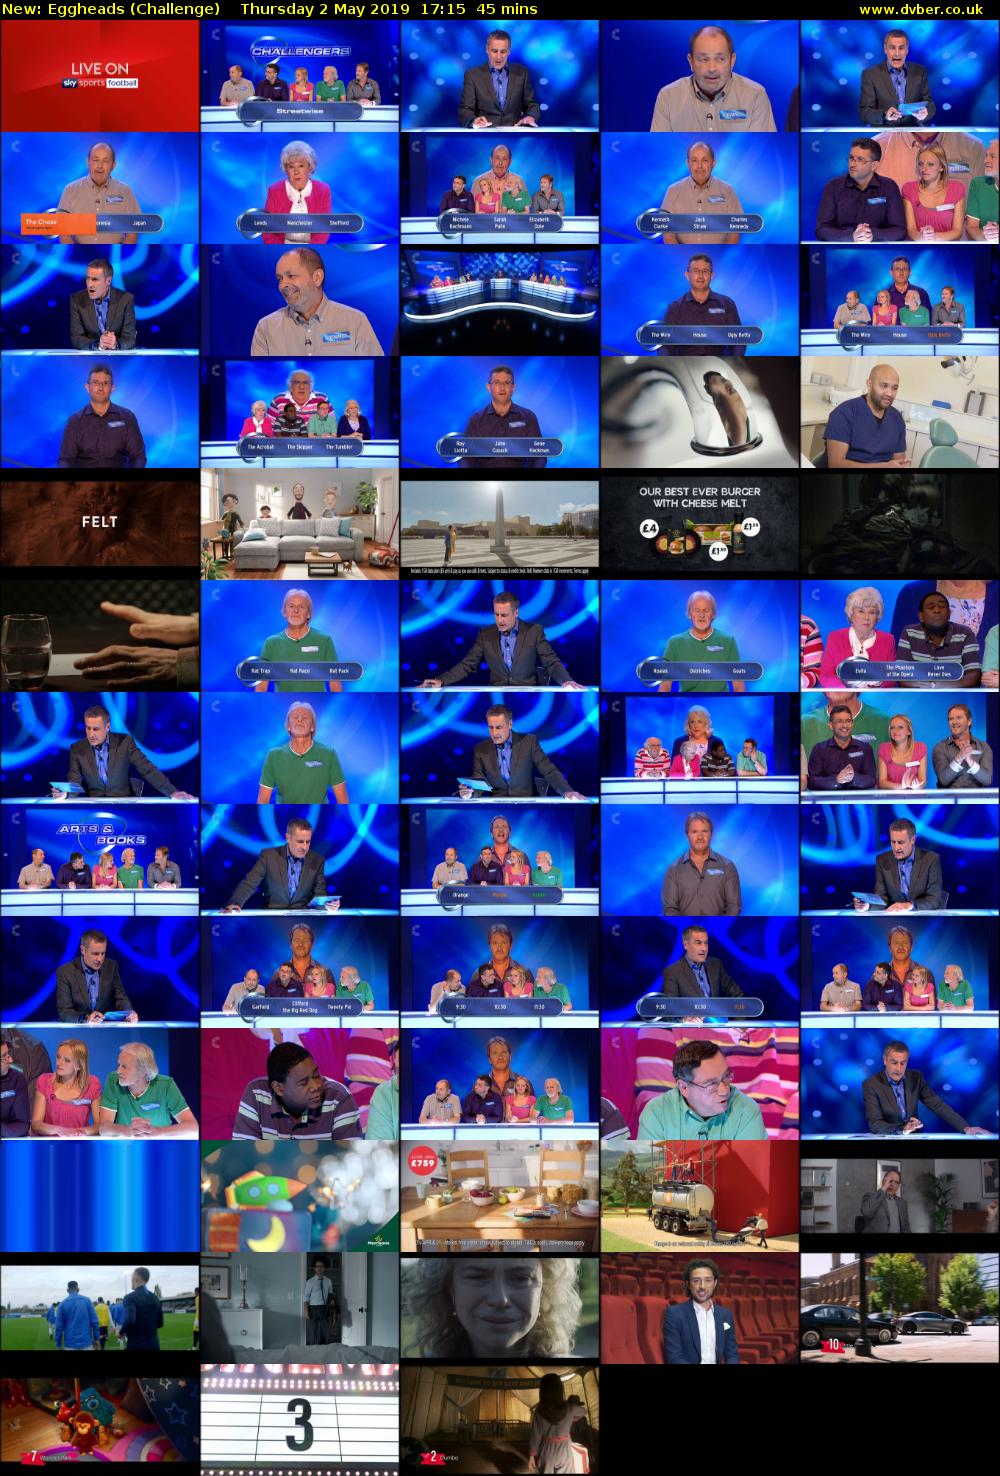 Eggheads (Challenge) Thursday 2 May 2019 17:15 - 18:00